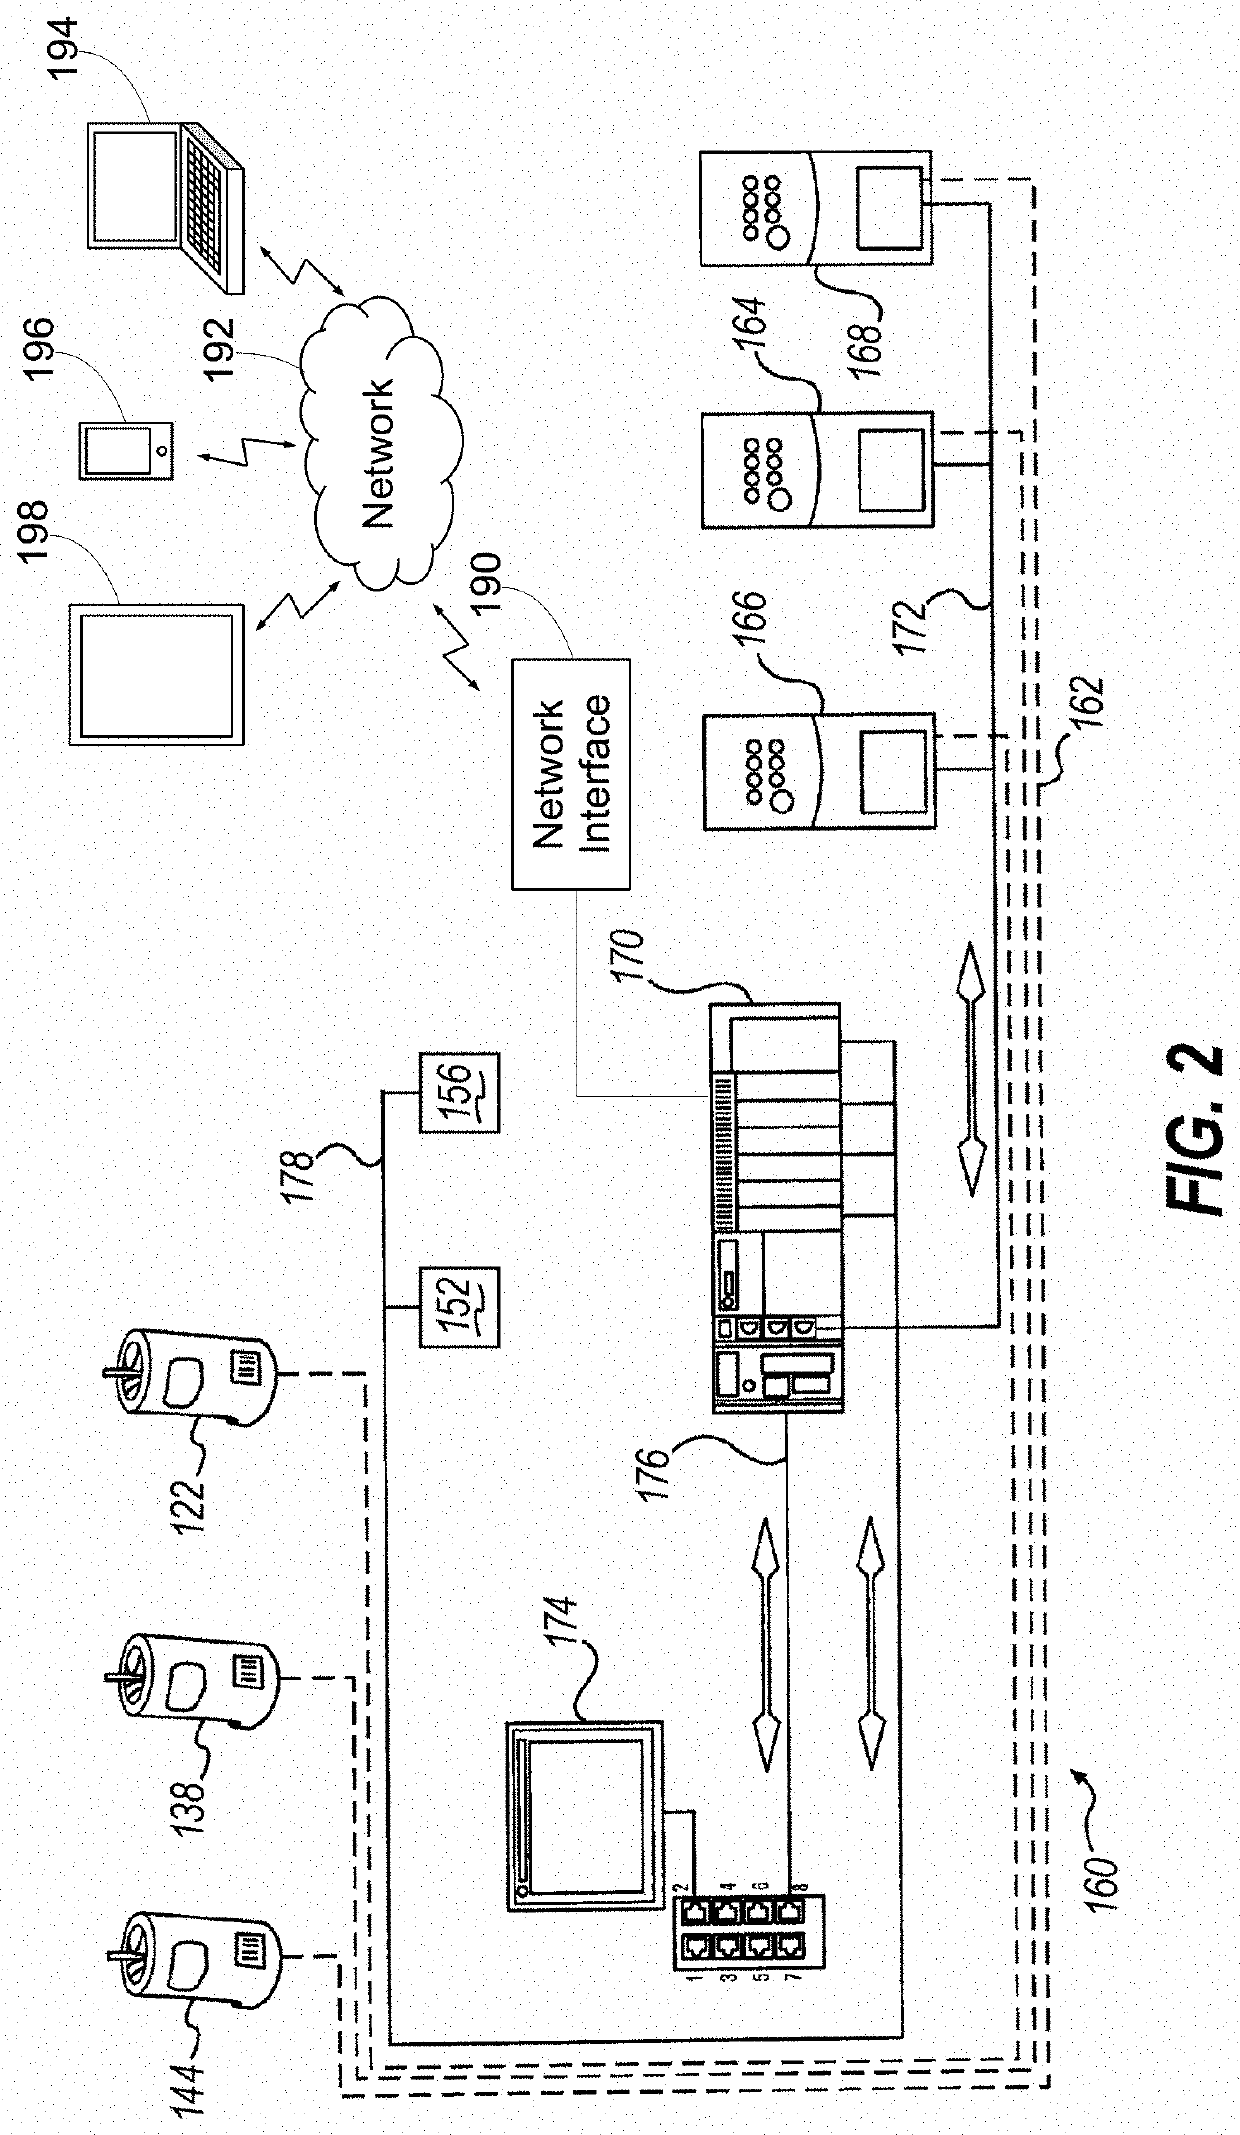 Packaging material evaluation and apparatus therefor incorporating split take up drum and/or specific containment force measurement